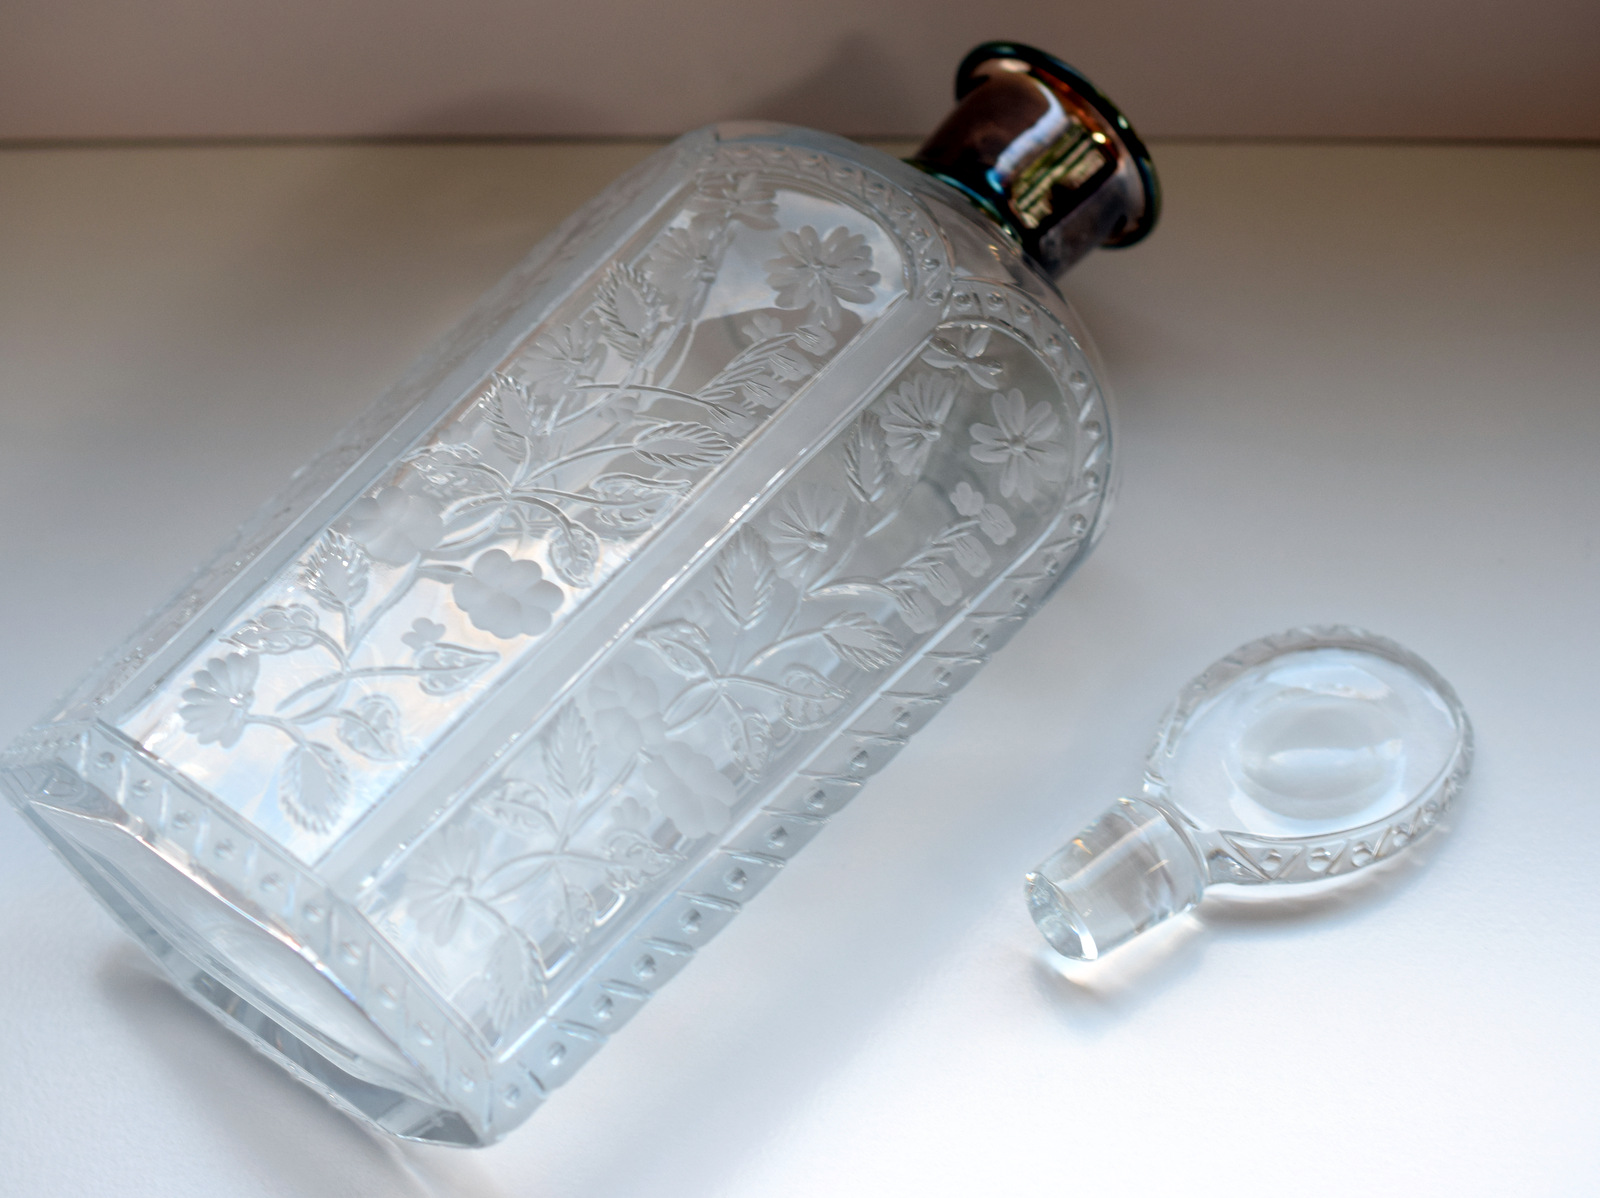 Rare Royal Brierley Heritage Limited Edition Decanter - Image 3 of 7